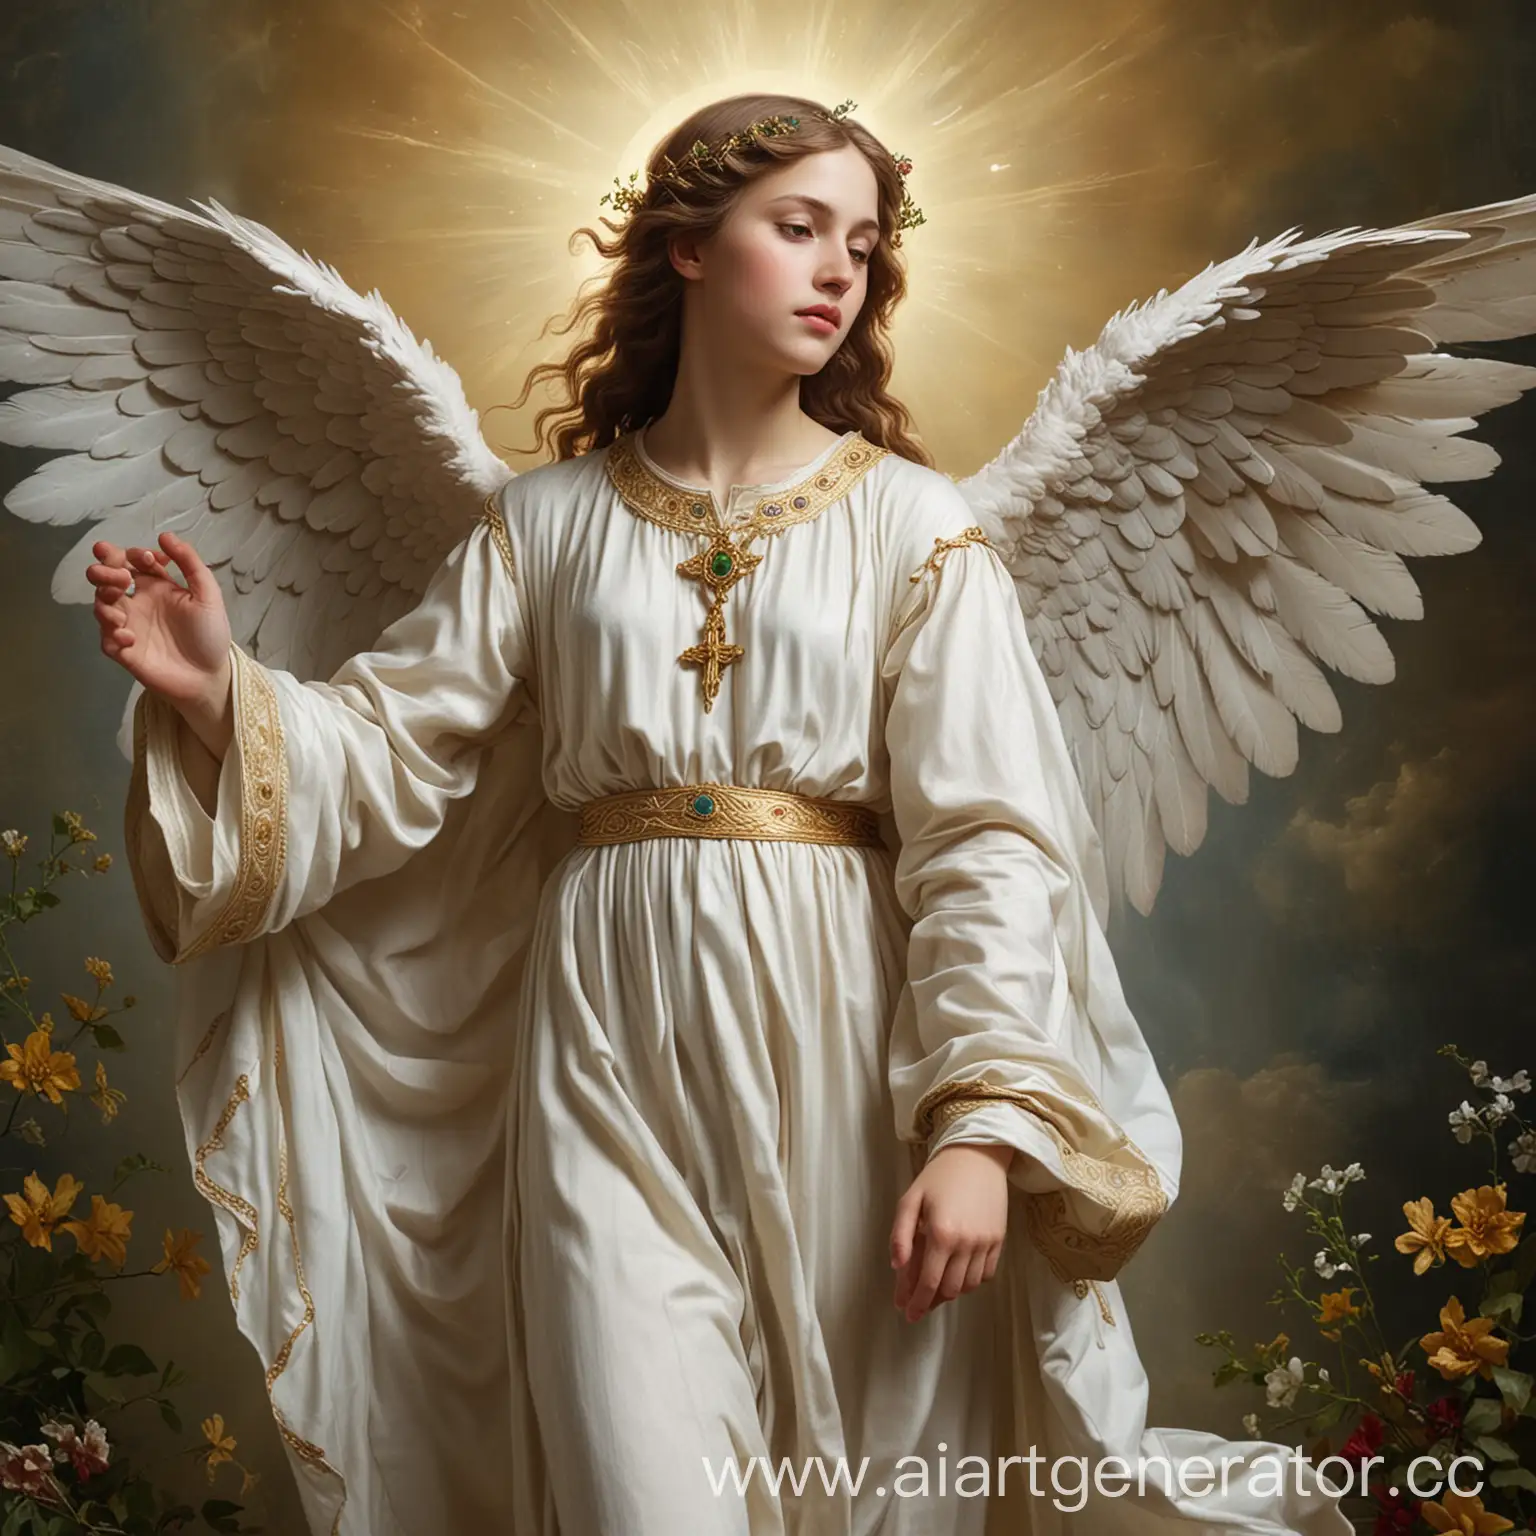 Holy-Archangel-Gabriel-Tempted-by-Human-Desires-in-a-Veiled-Feminine-Pose